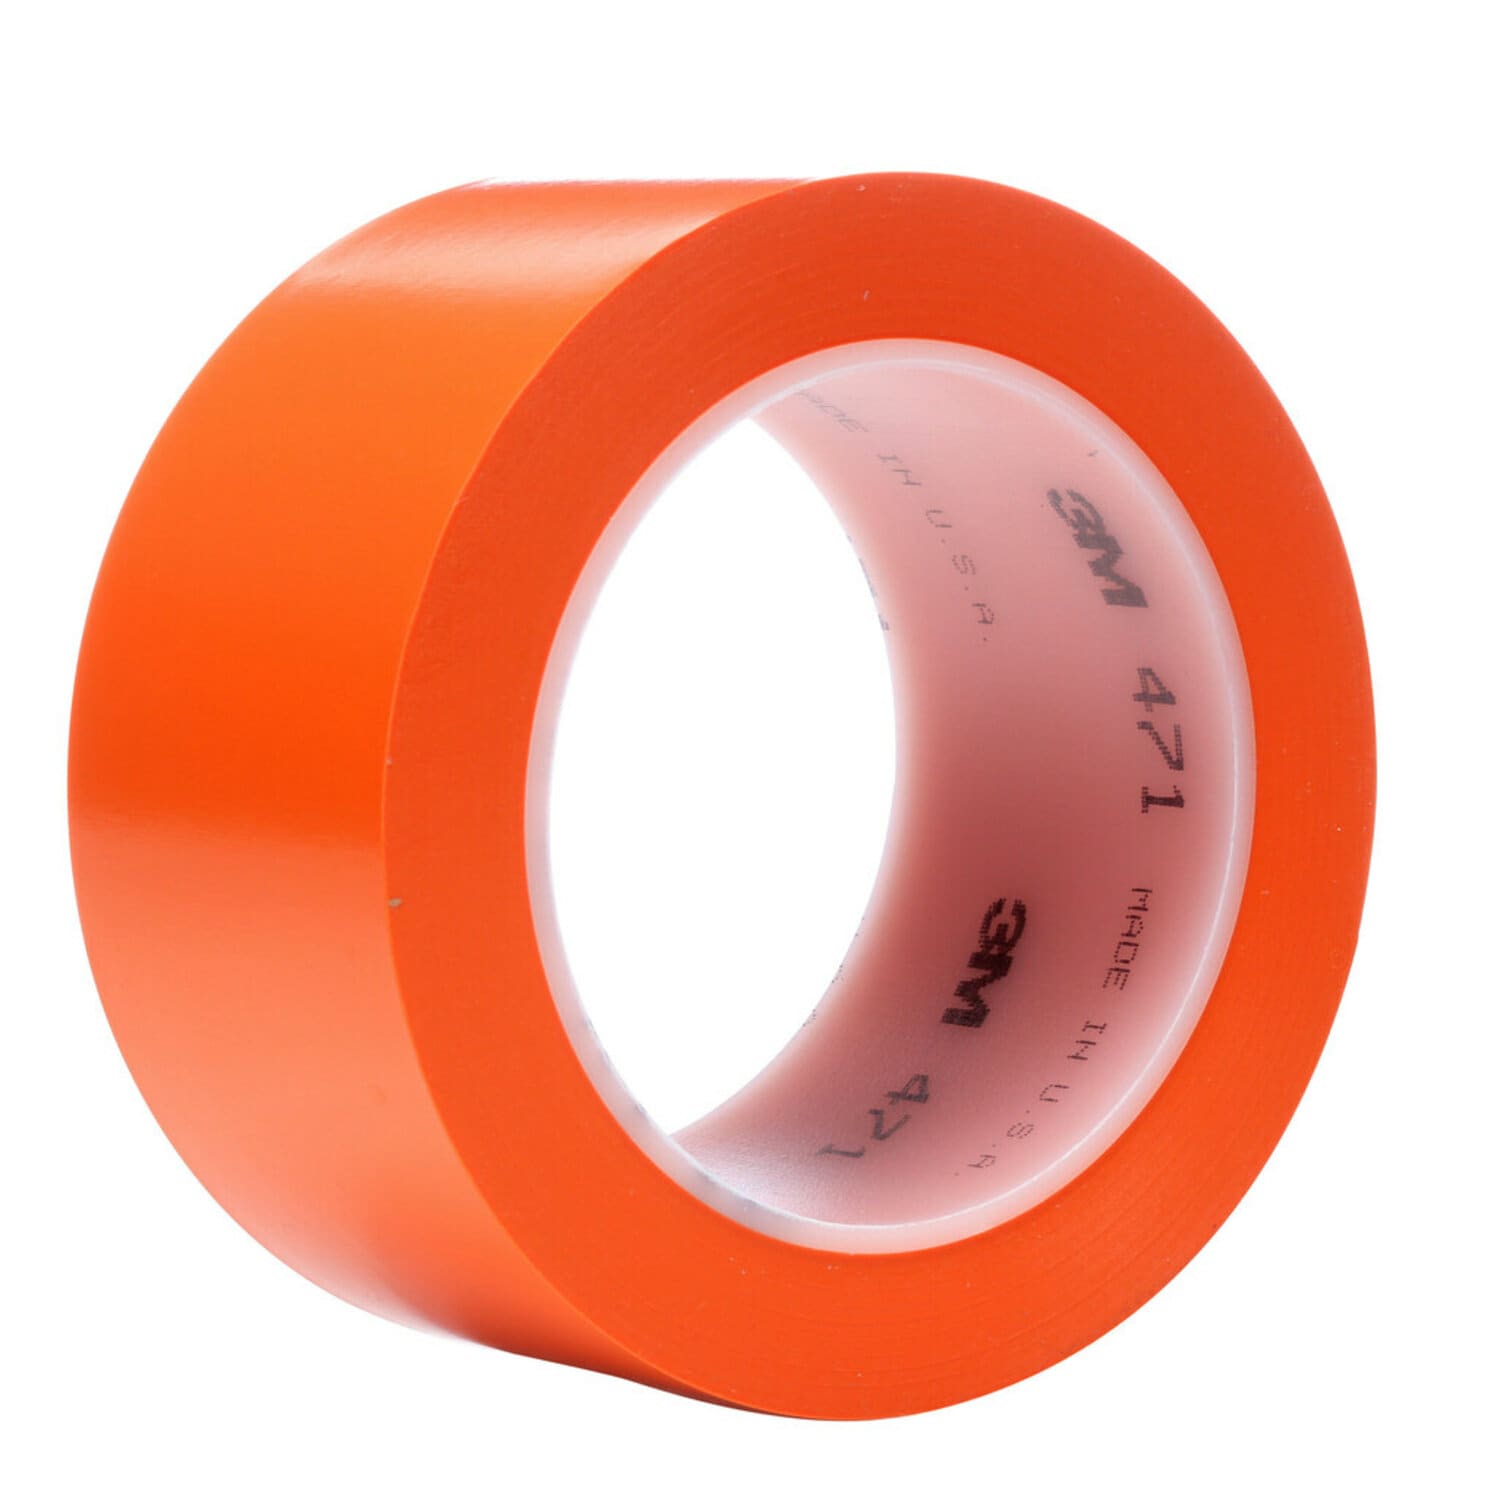 7010293244 - 3M Vinyl Tape 471, Orange, 1/4 in x 36 yd, 5.2 mil, 144 rolls per case,
Individually Wrapped Conveniently Packaged